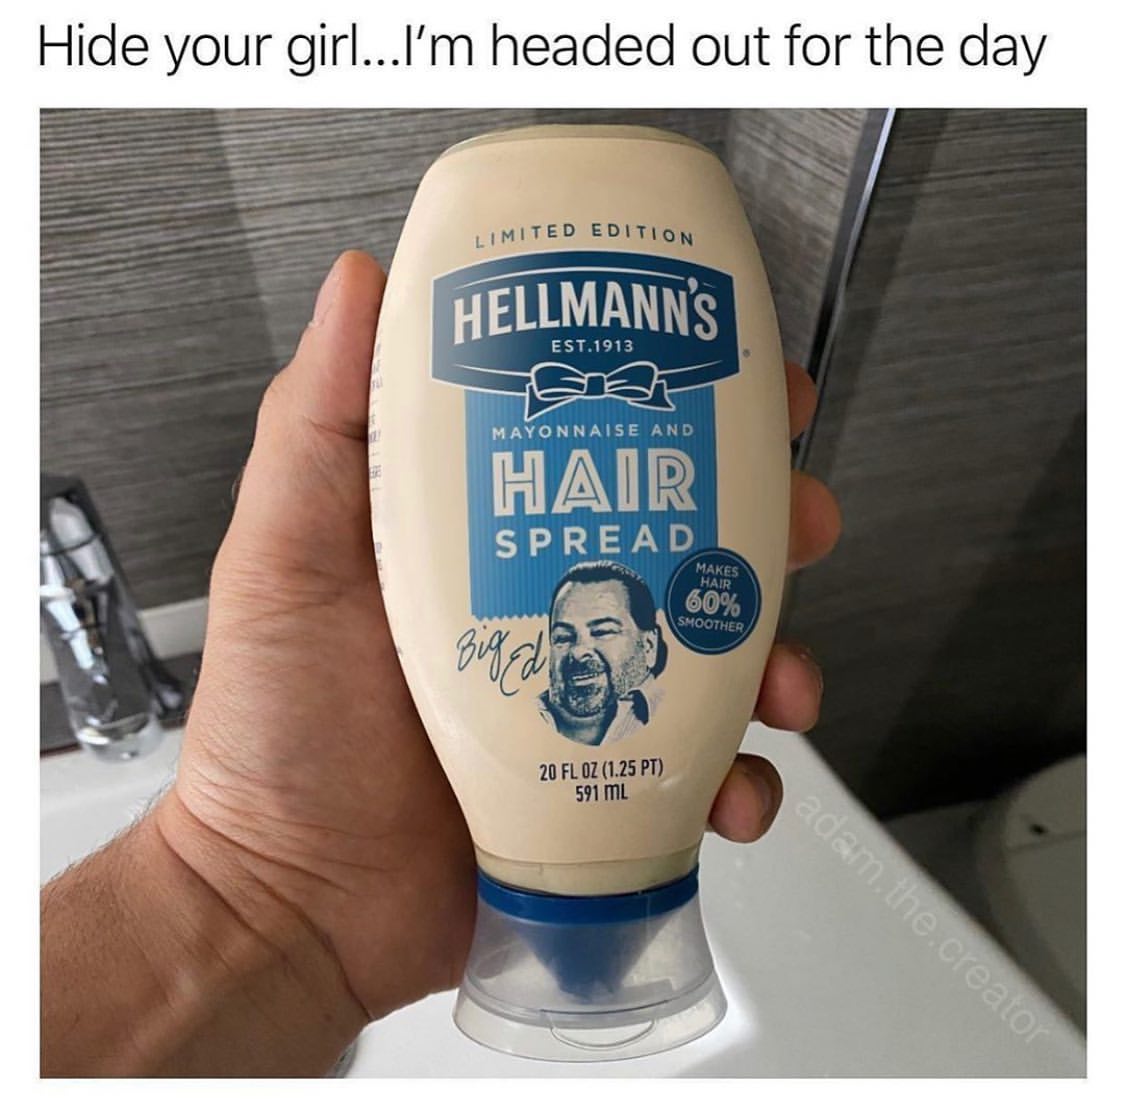 Hide your girl... I'm headed out for the day.  Mayonnaise and hair spread.